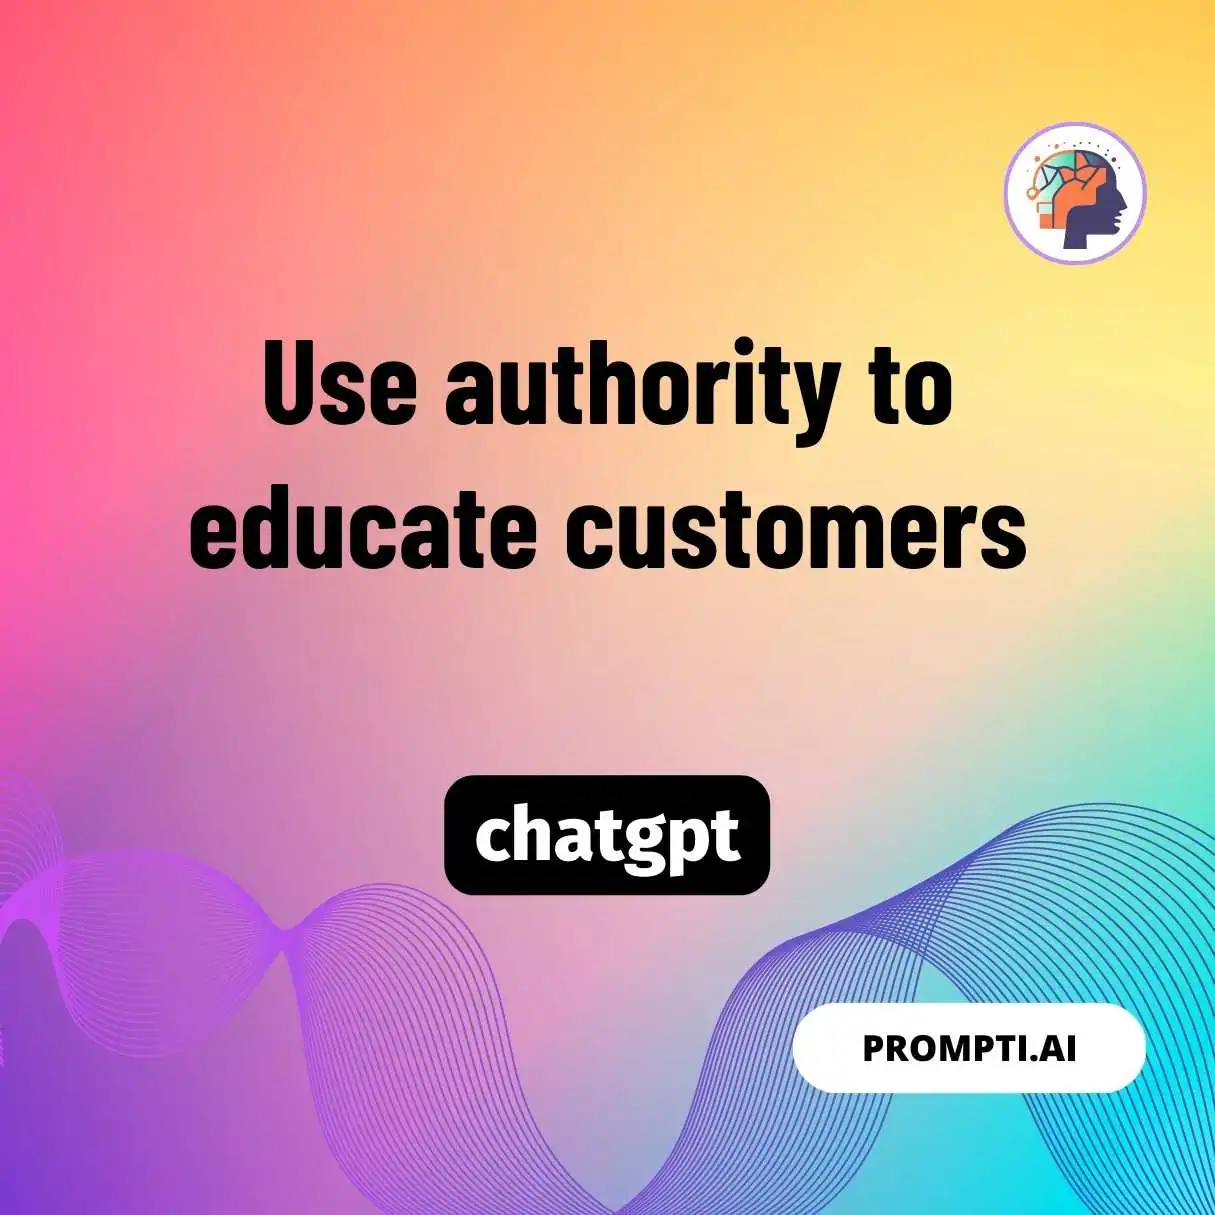 Use authority to educate customers